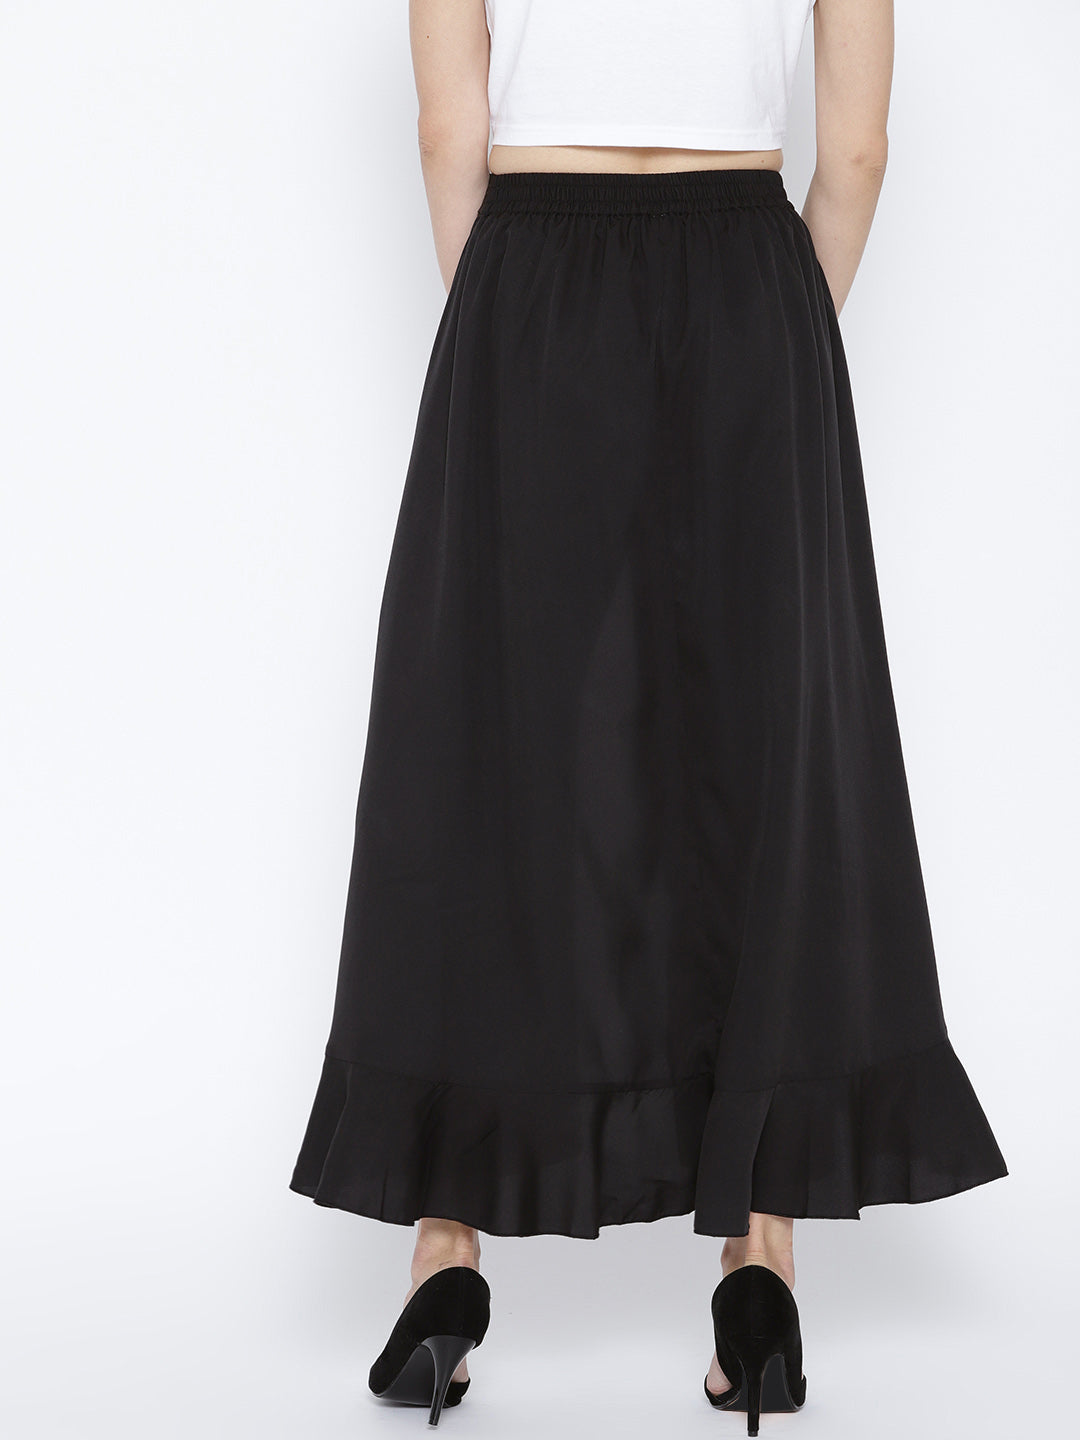 Black Solid Ruffled Flared Maxi Skirt with Attached Trousers - Berrylush